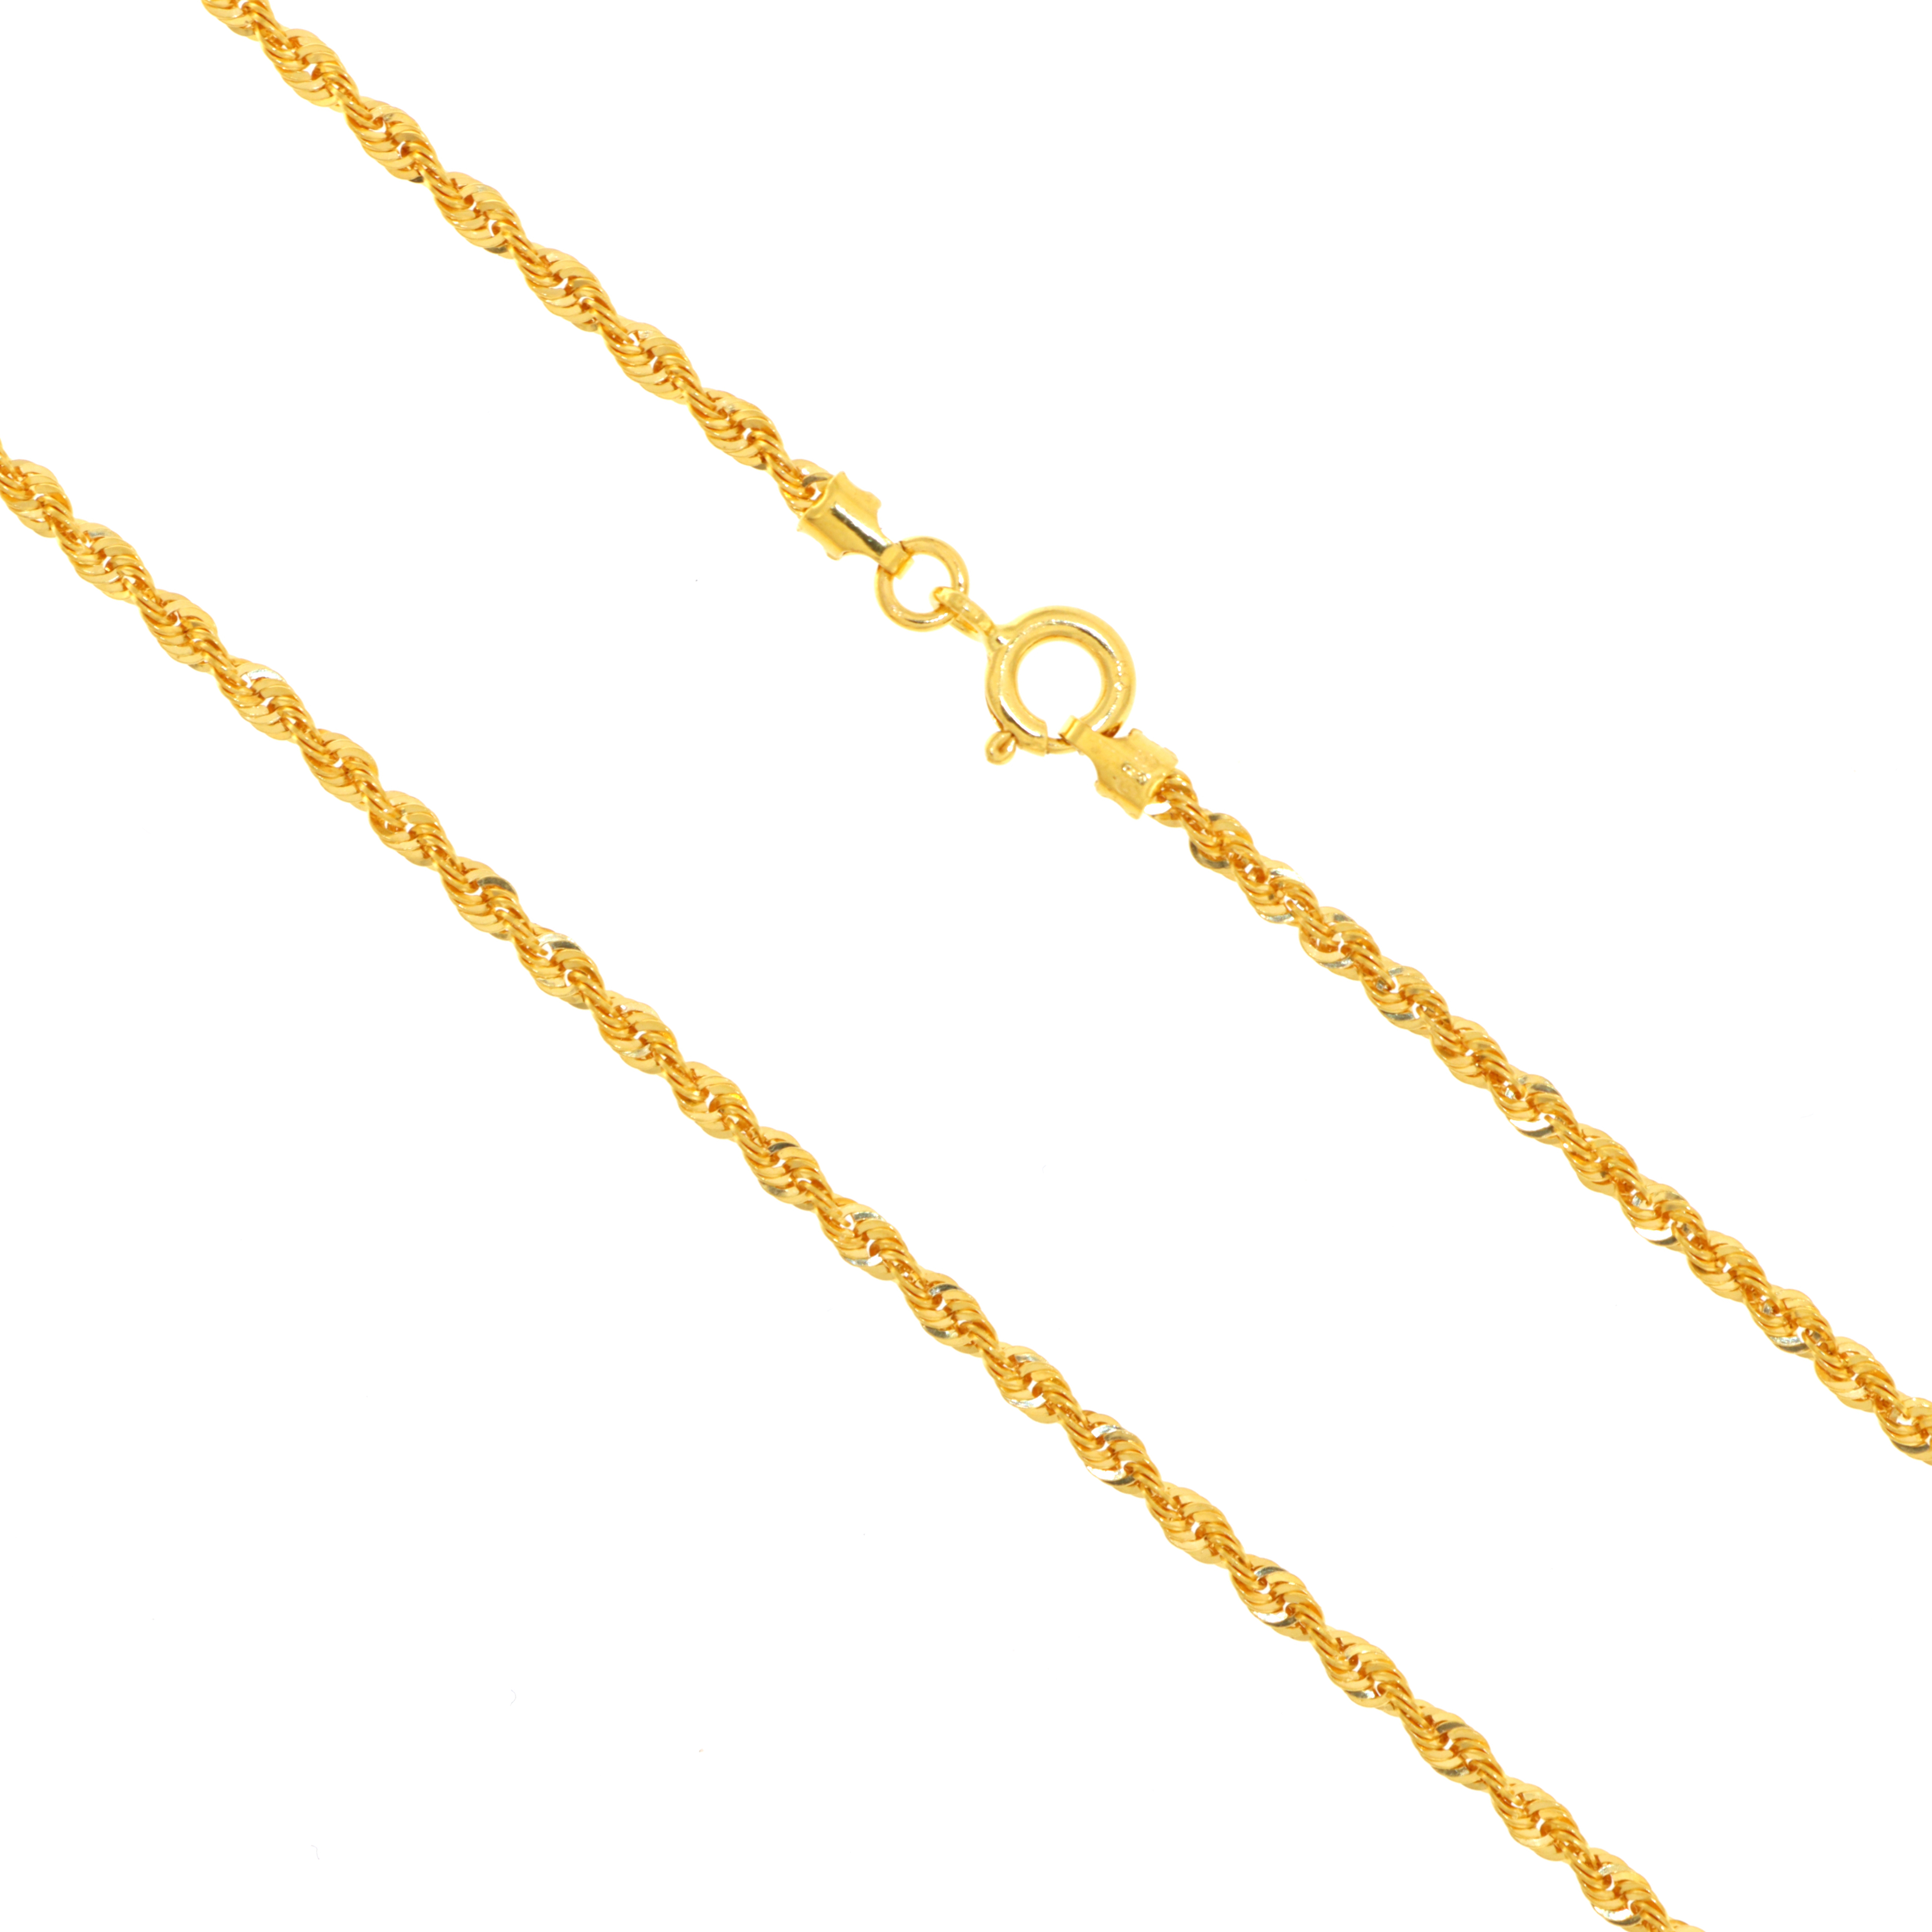 22carat Gold Hollow Rope Chain